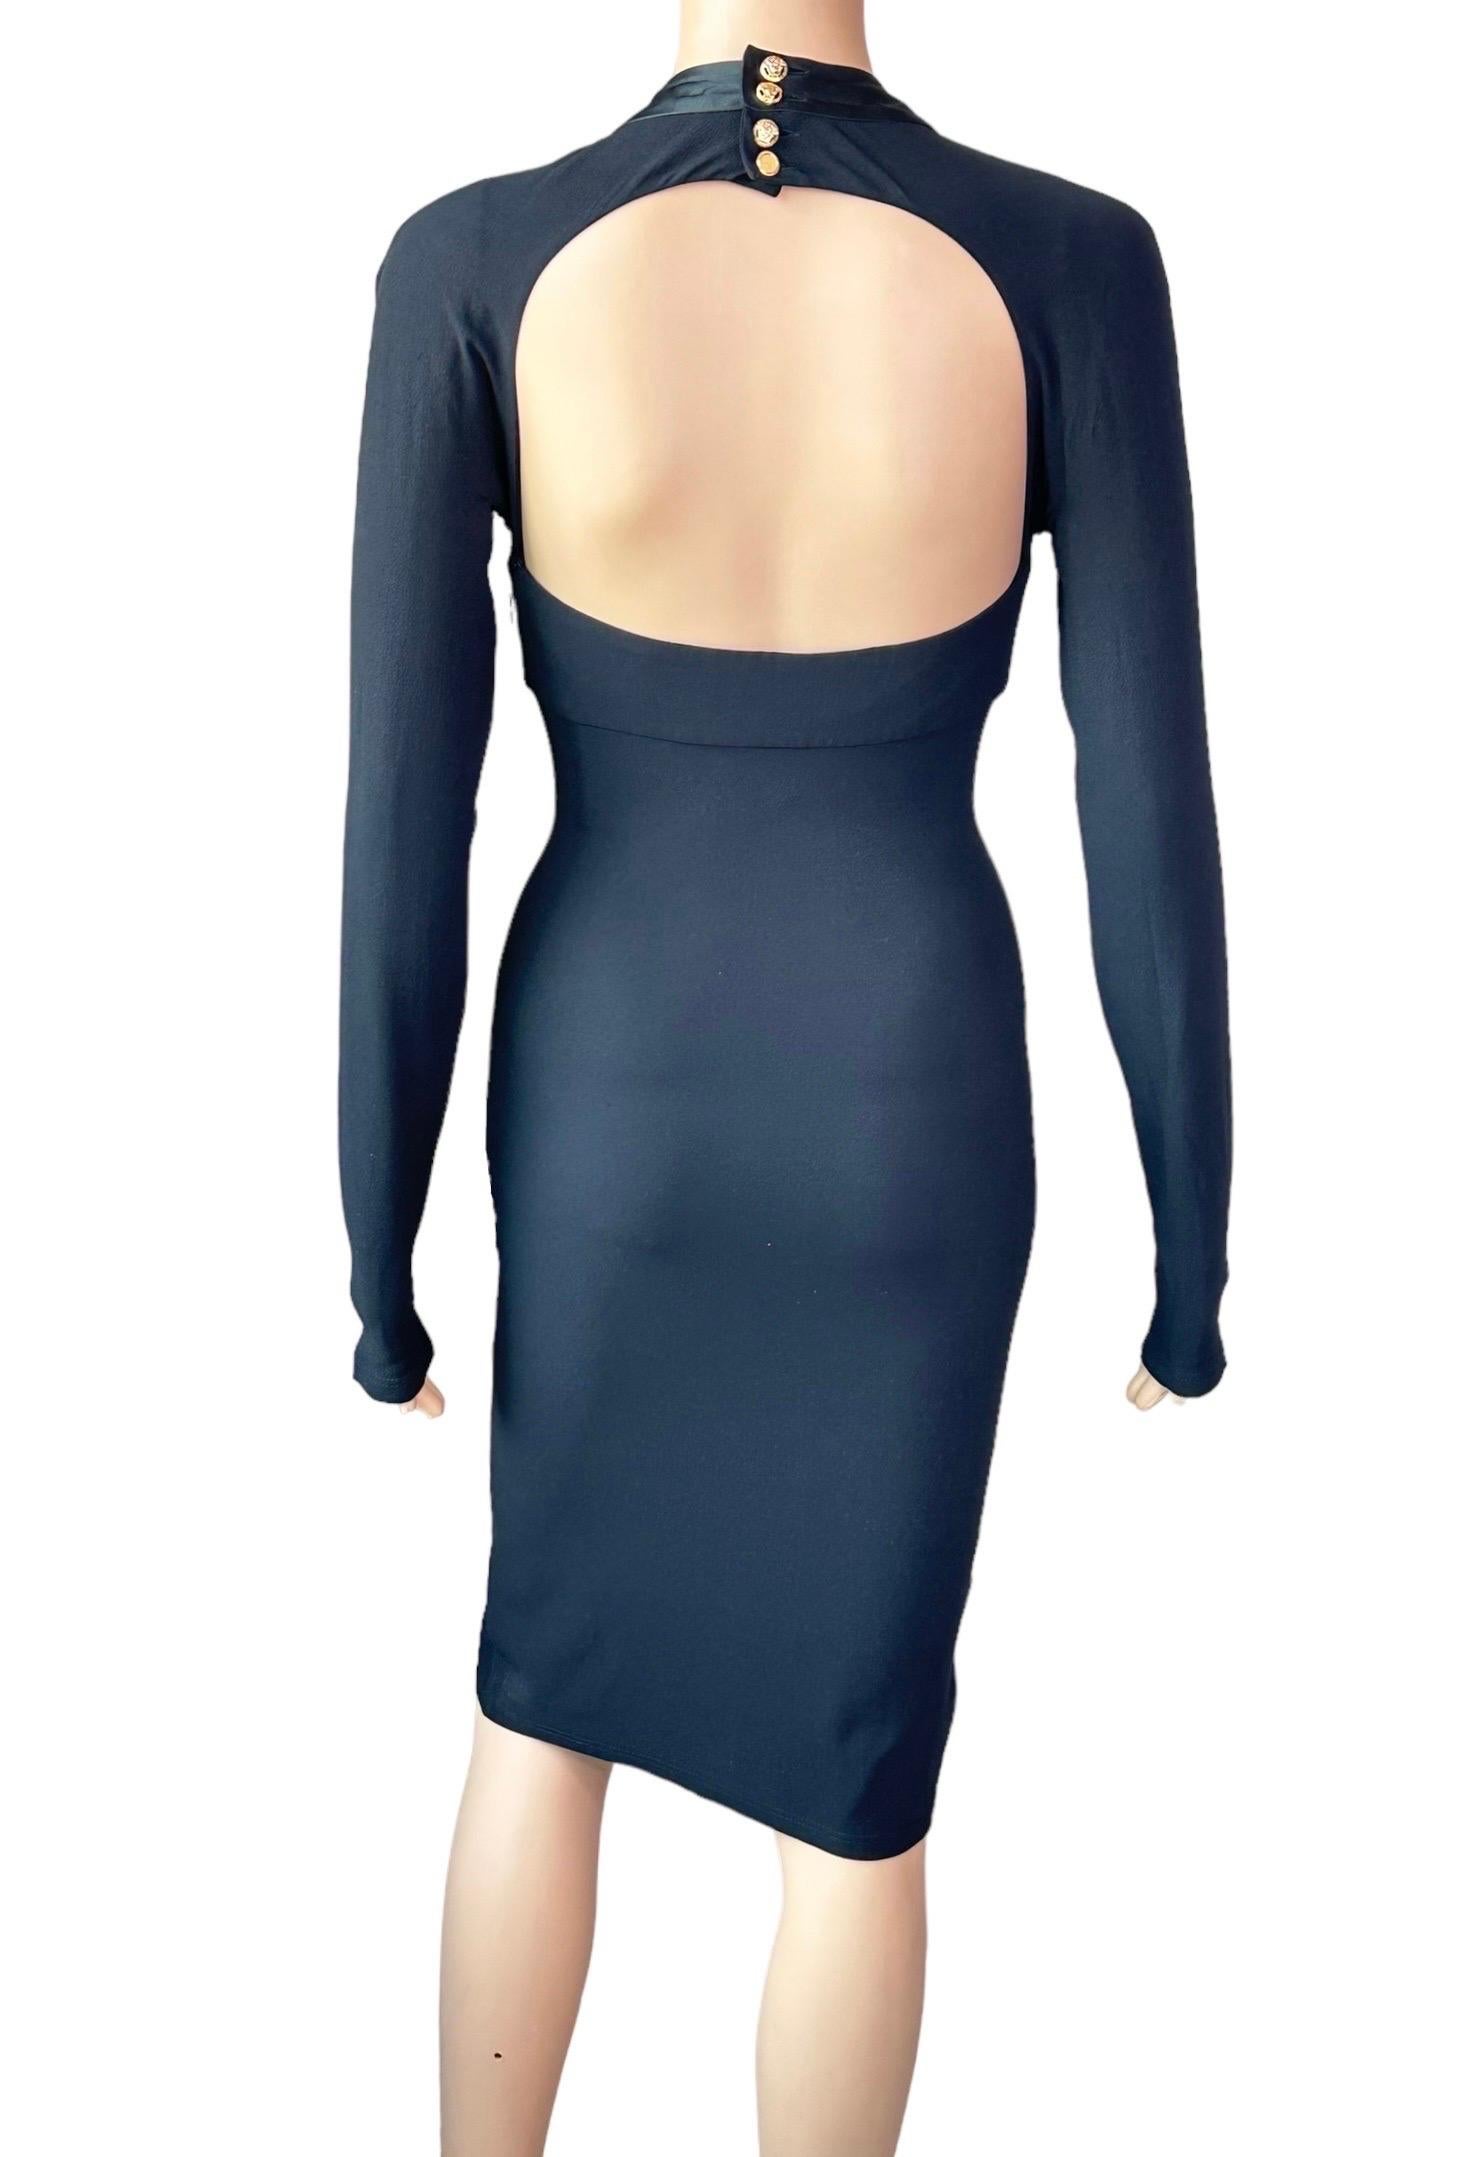 Versace F/W 2005 Bustier Plunging Neckline Cutout Black Dress In Good Condition For Sale In Naples, FL